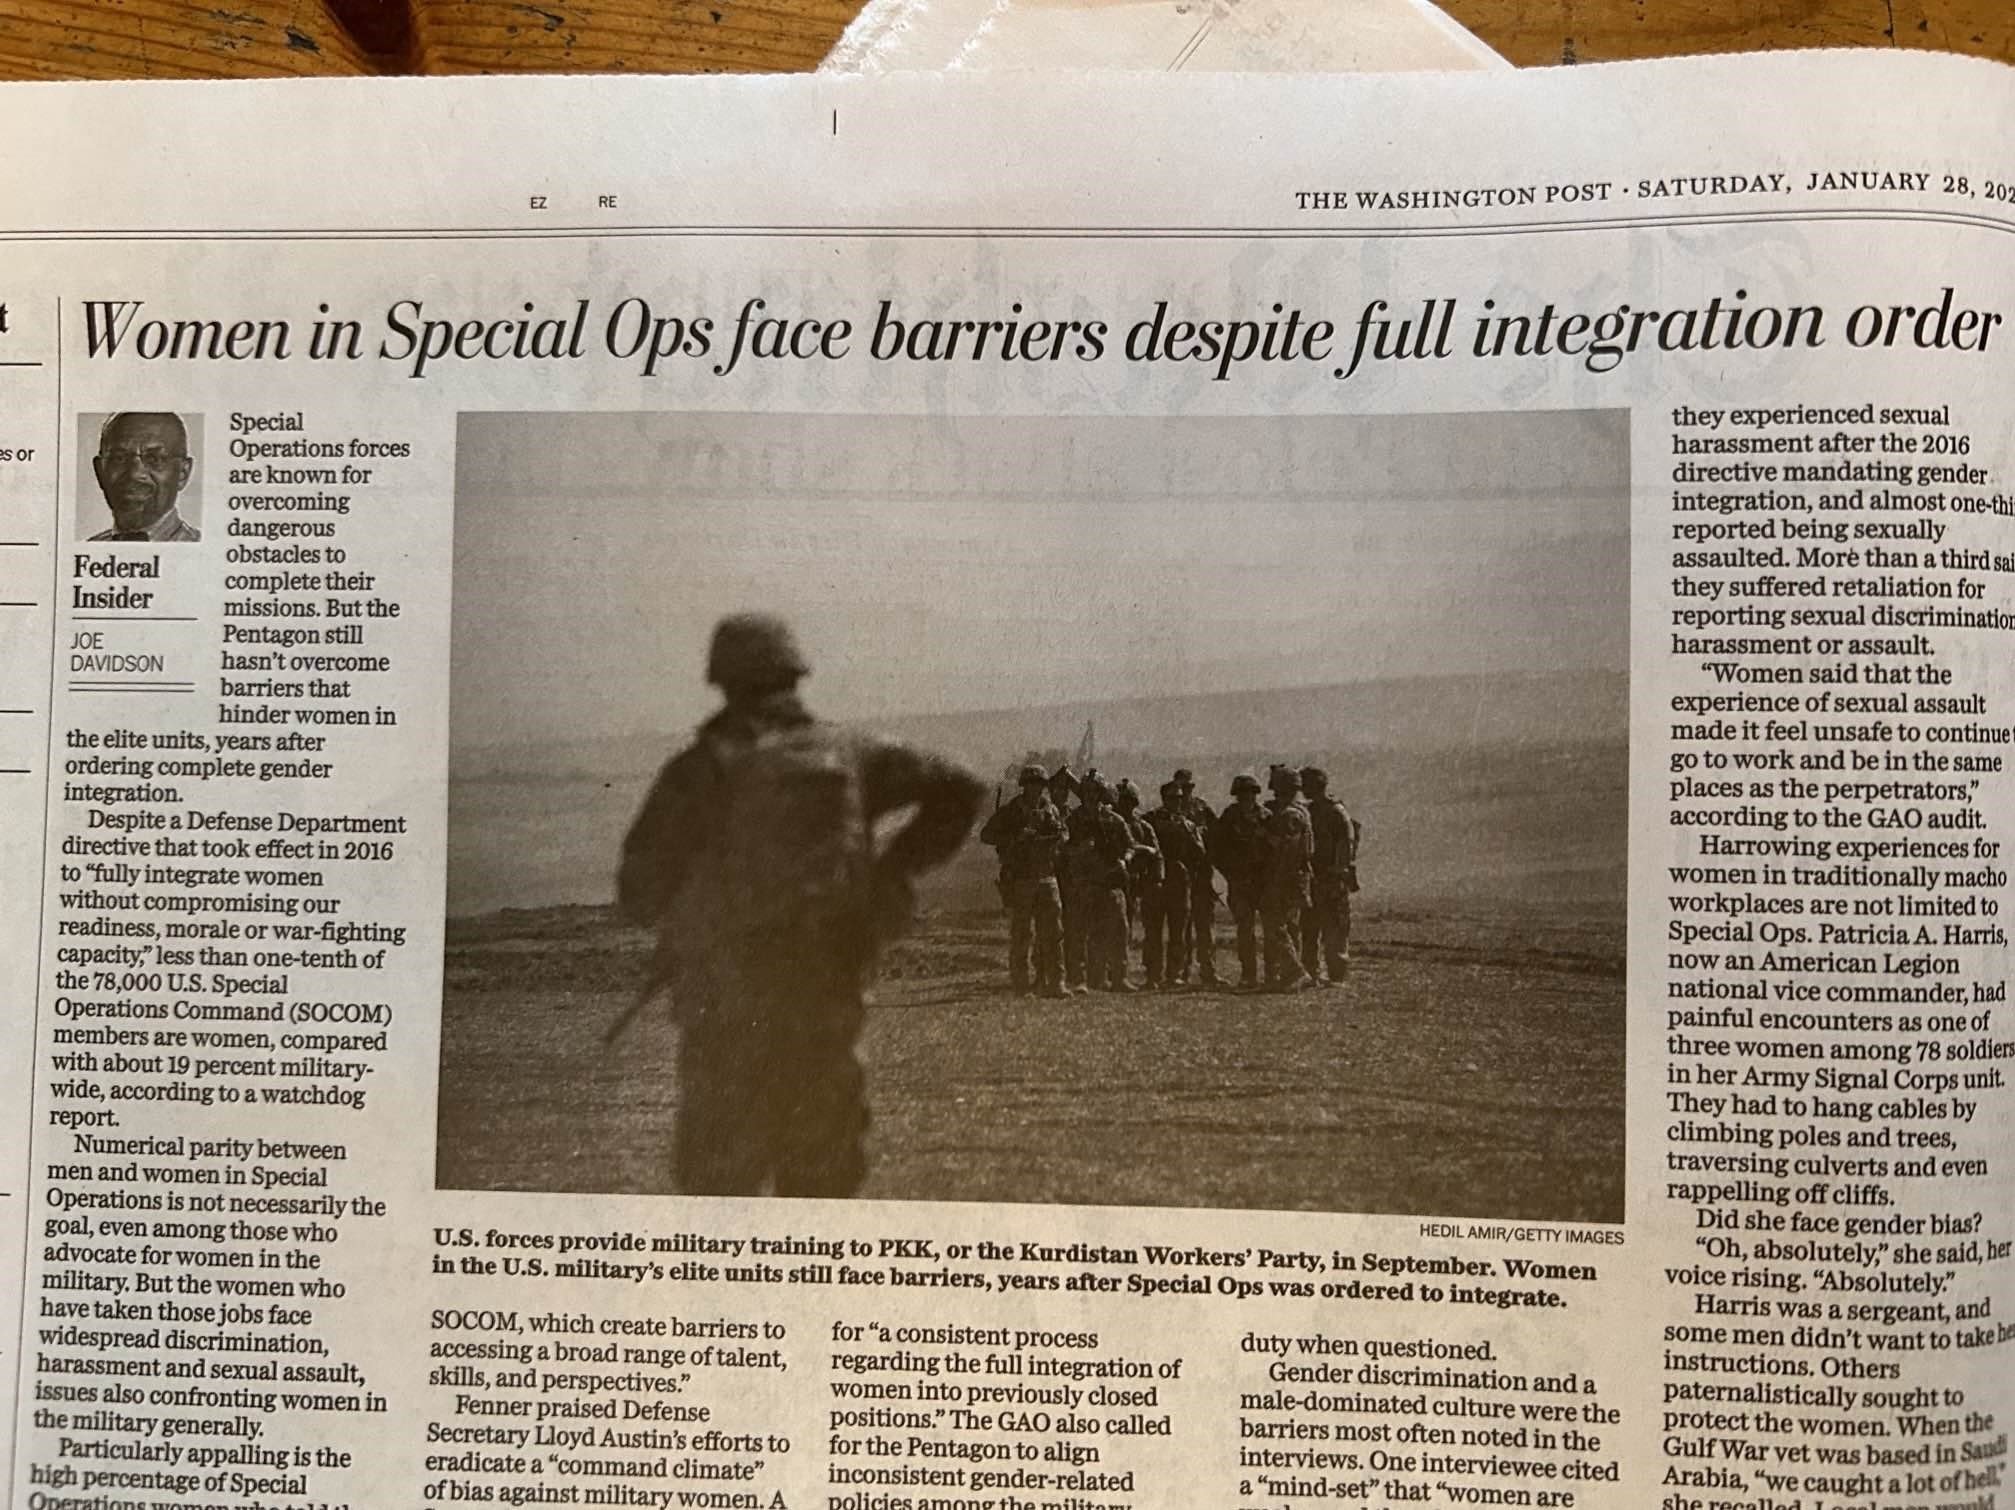 This photo shared by American political analyst Bruce Hoffman shows Joe Davidson’s article “Women in Special Ops face barriers despite full integration order” and its controversial caption in The Washington Post. (Twitter: @hoffman_bruce)